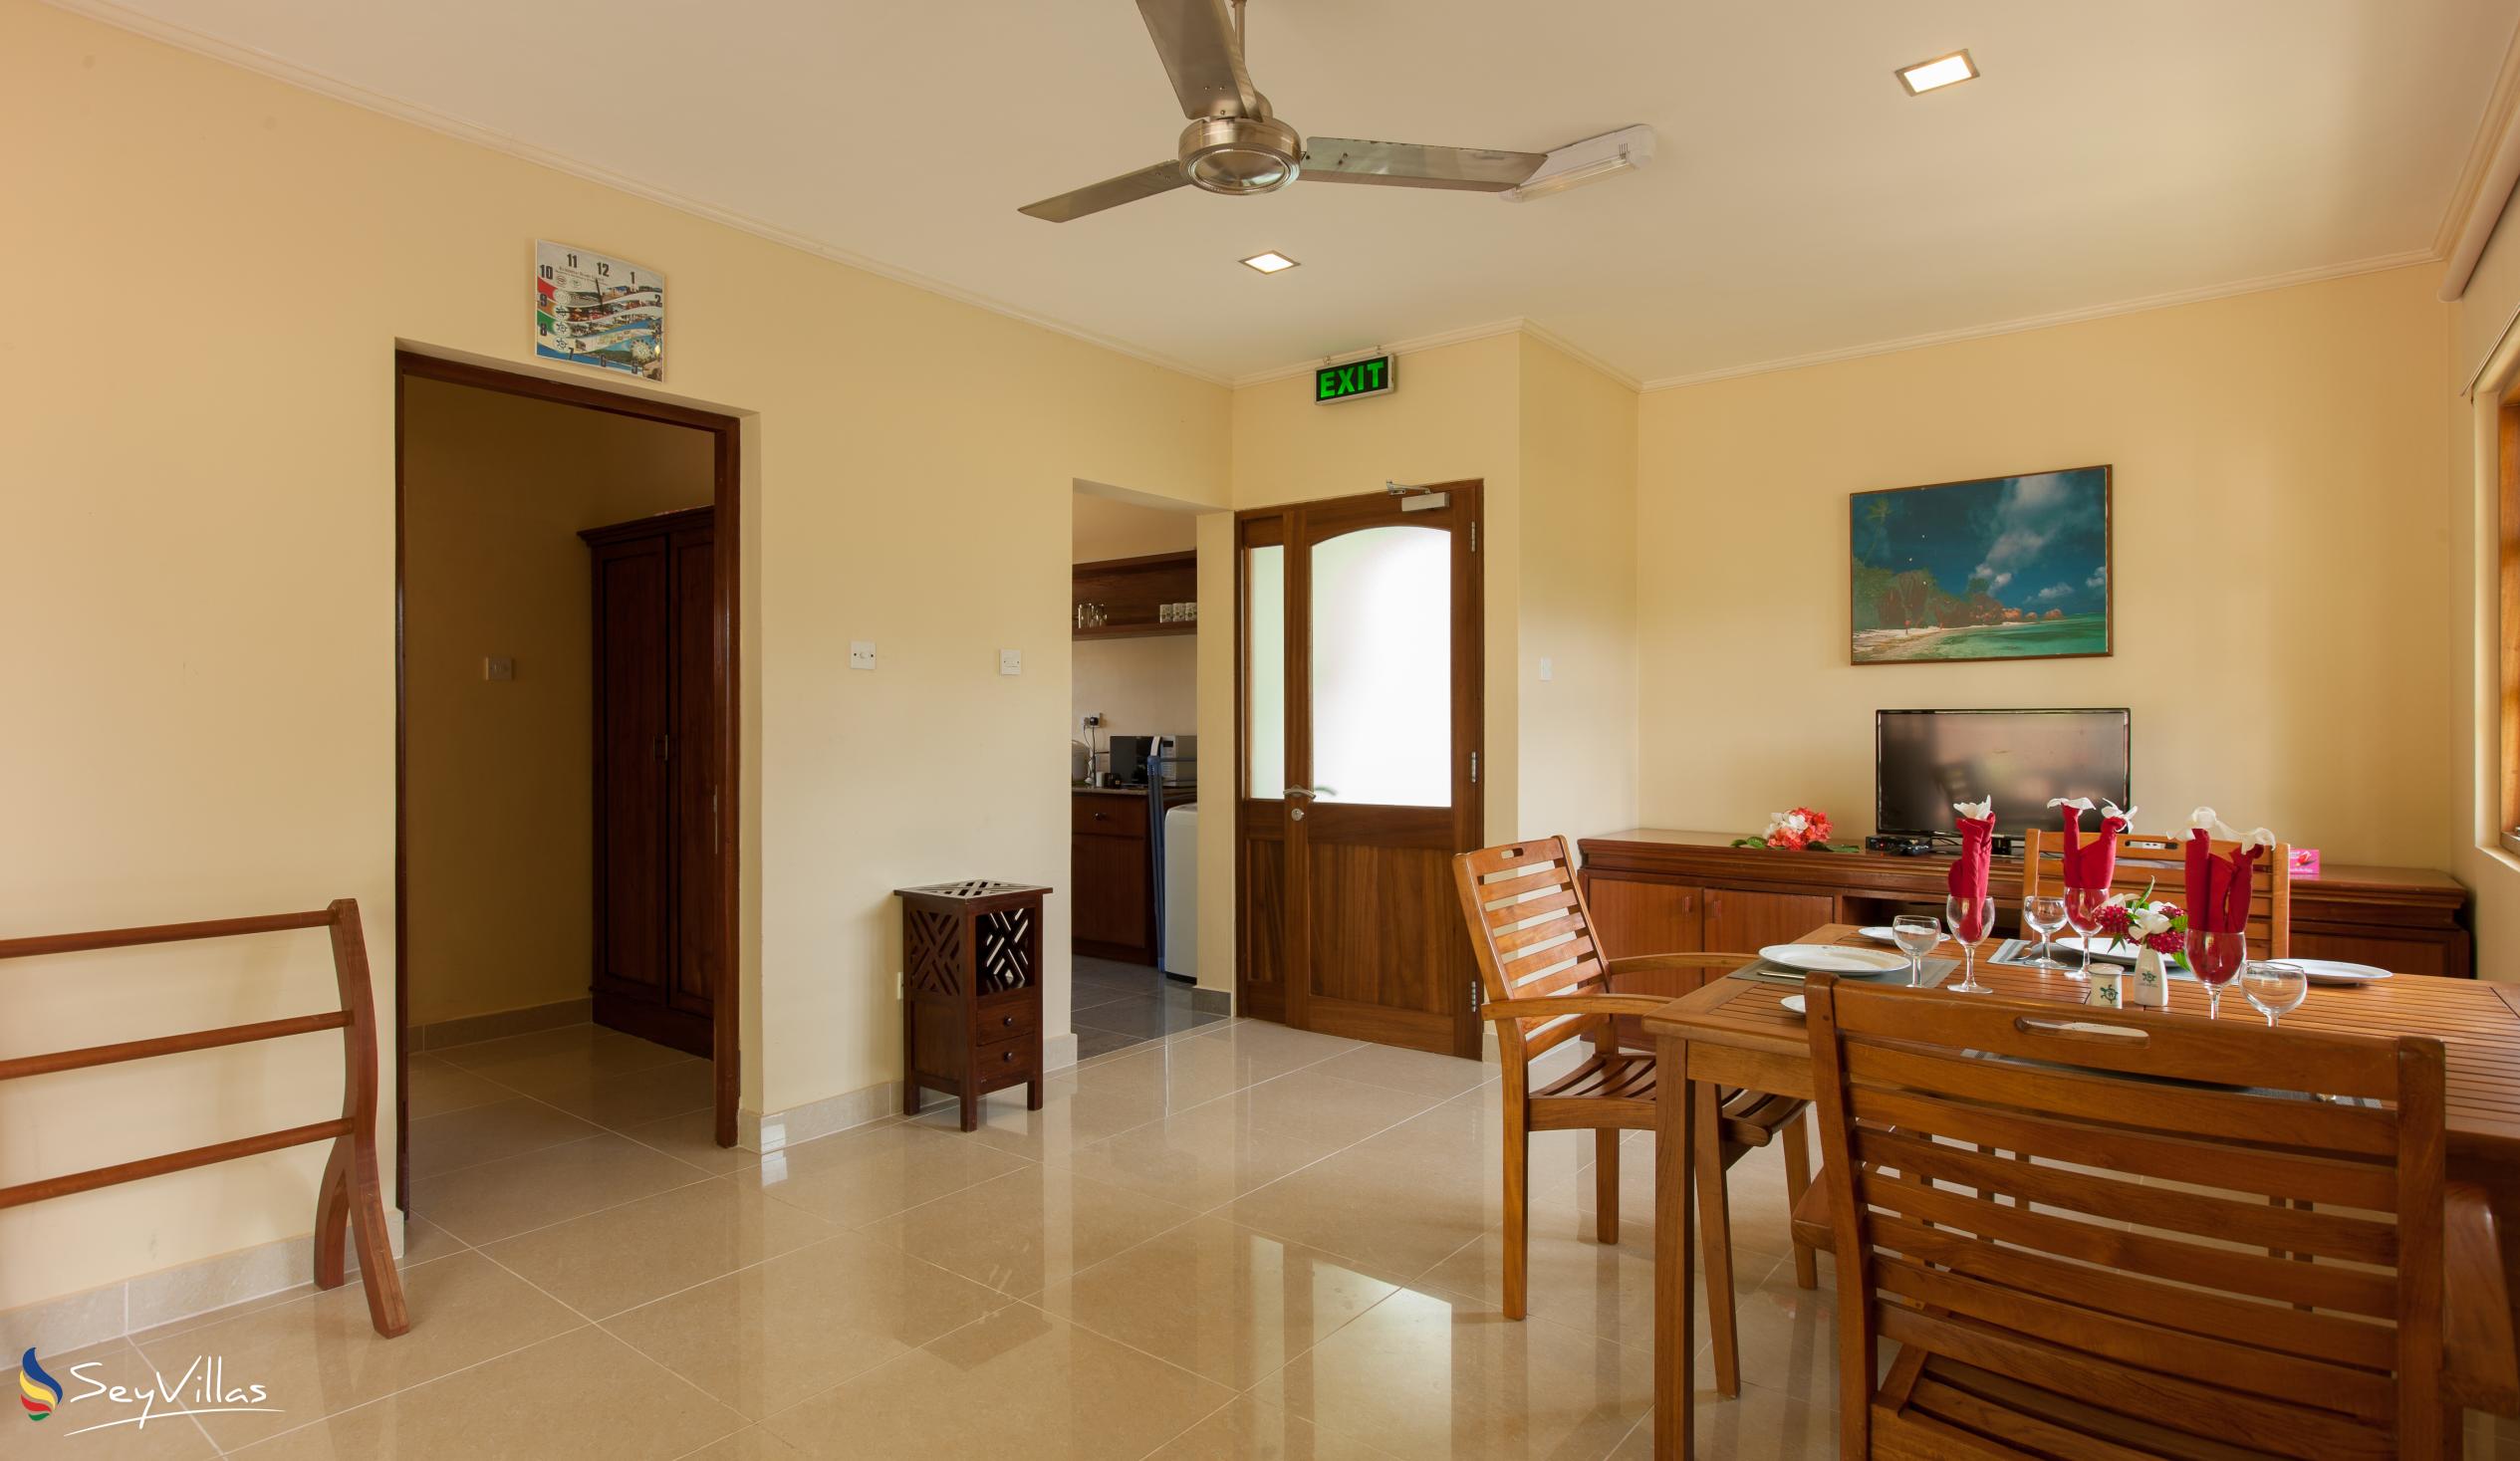 Foto 28: Le Relax Self Catering - Deluxe Appartement - La Digue (Seychelles)